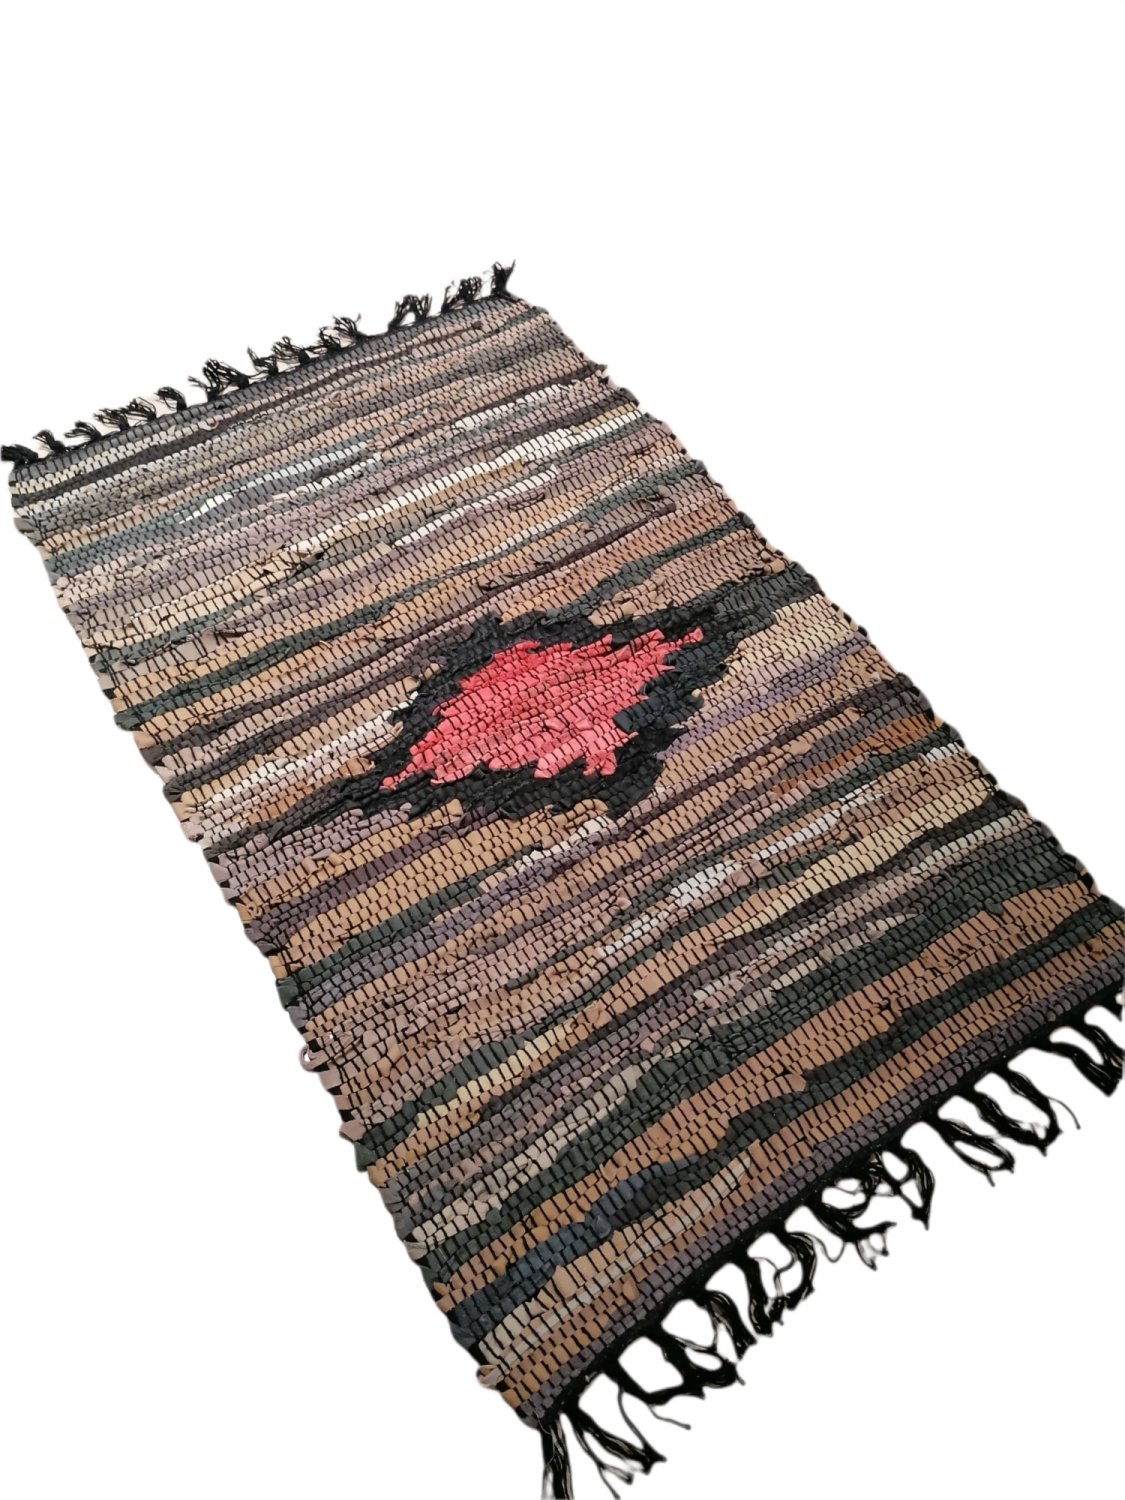 Leather Rug for Fireplace Fireproof Carpet BEIGE&BROWN with Red Diamond Hearth